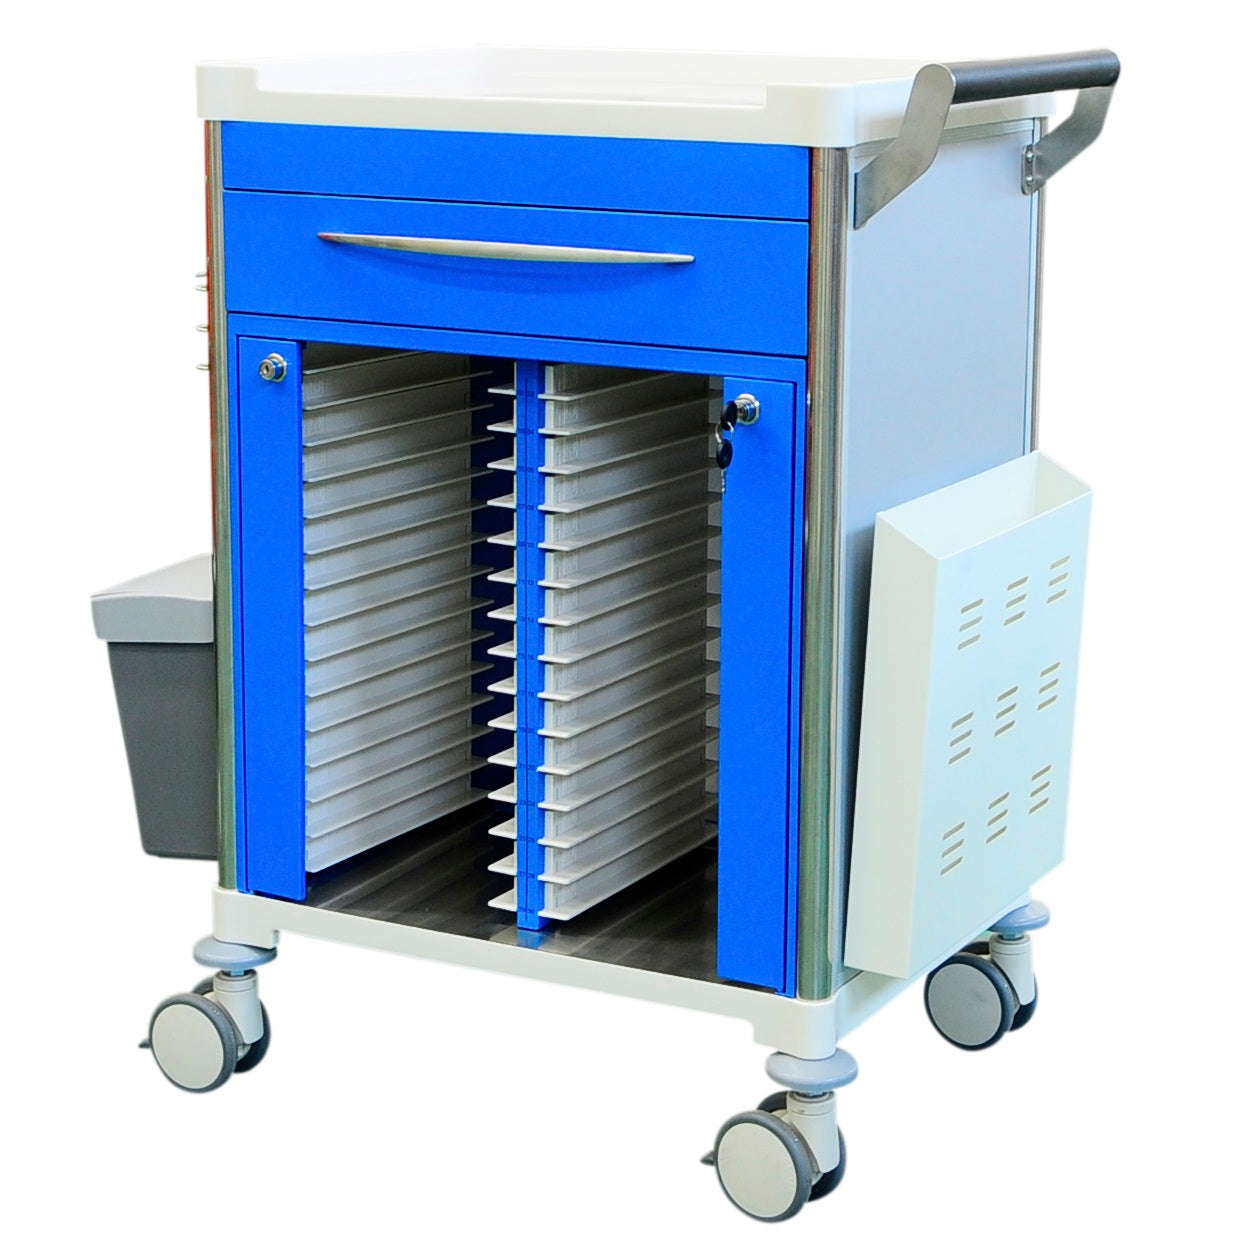 A full featured single drawer medical records trolley including all accessories. A great addition to any healthcare facility.